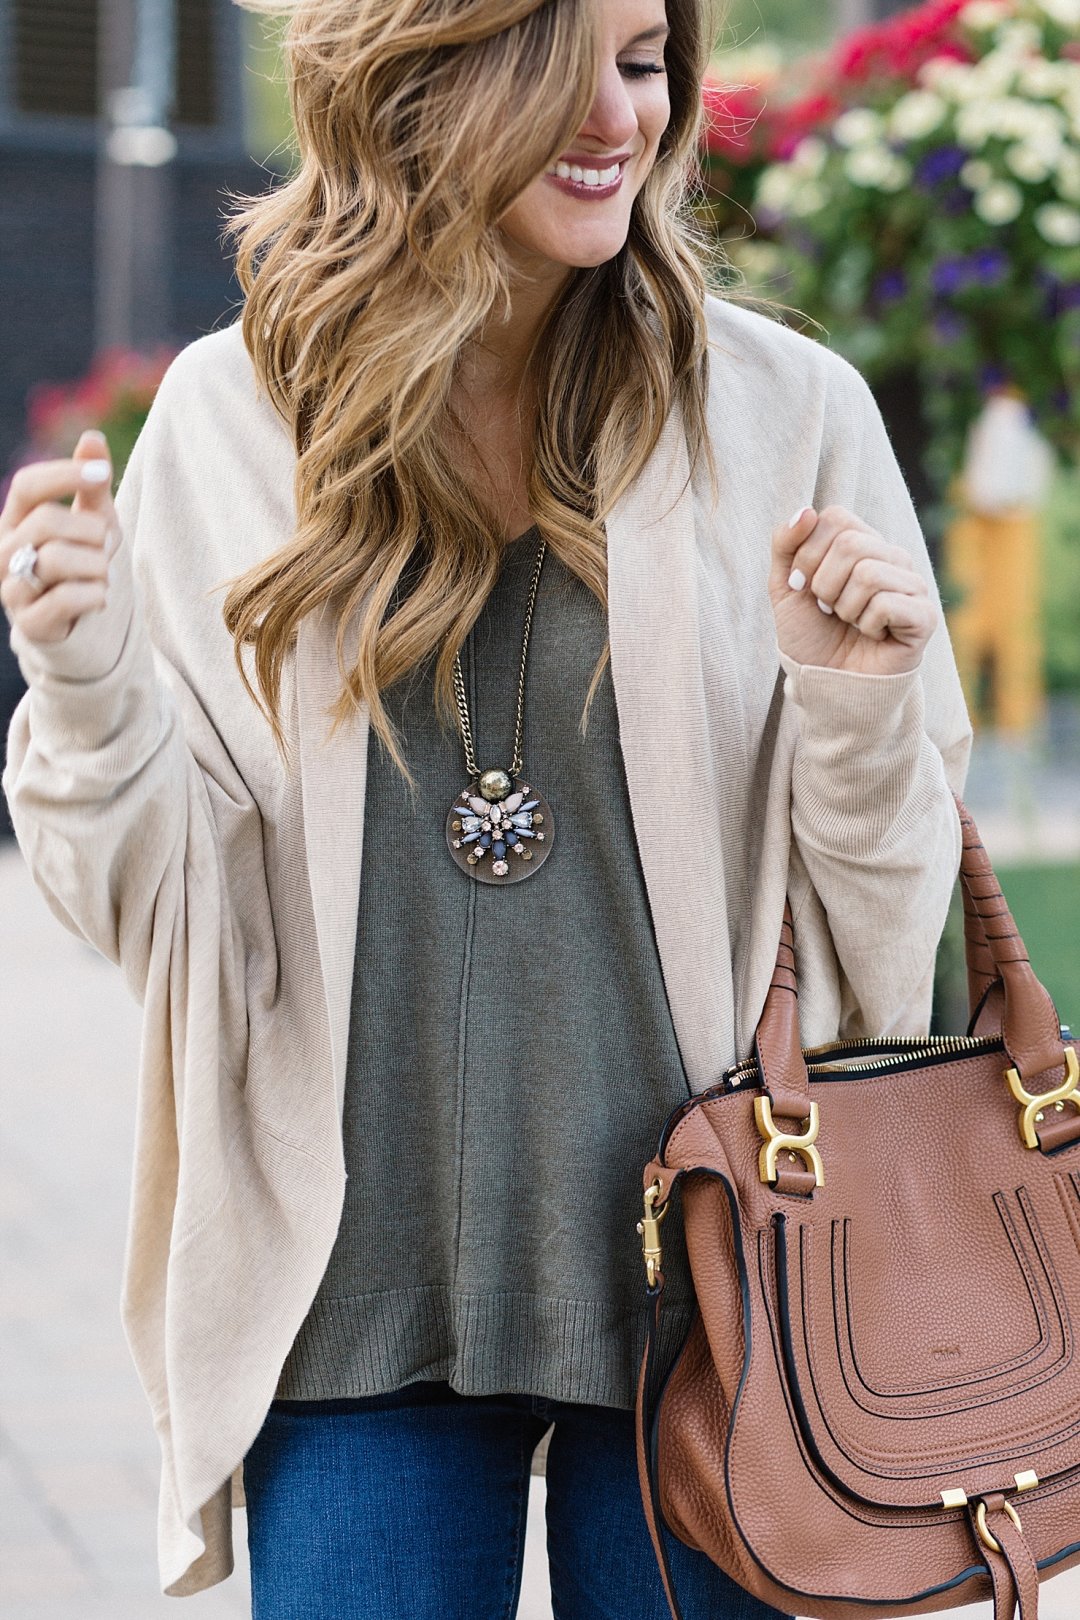 casual fall outfit details, baublebar pendant necklace, cocoon cradigan, olive green sweater, chloe tan bag with gold